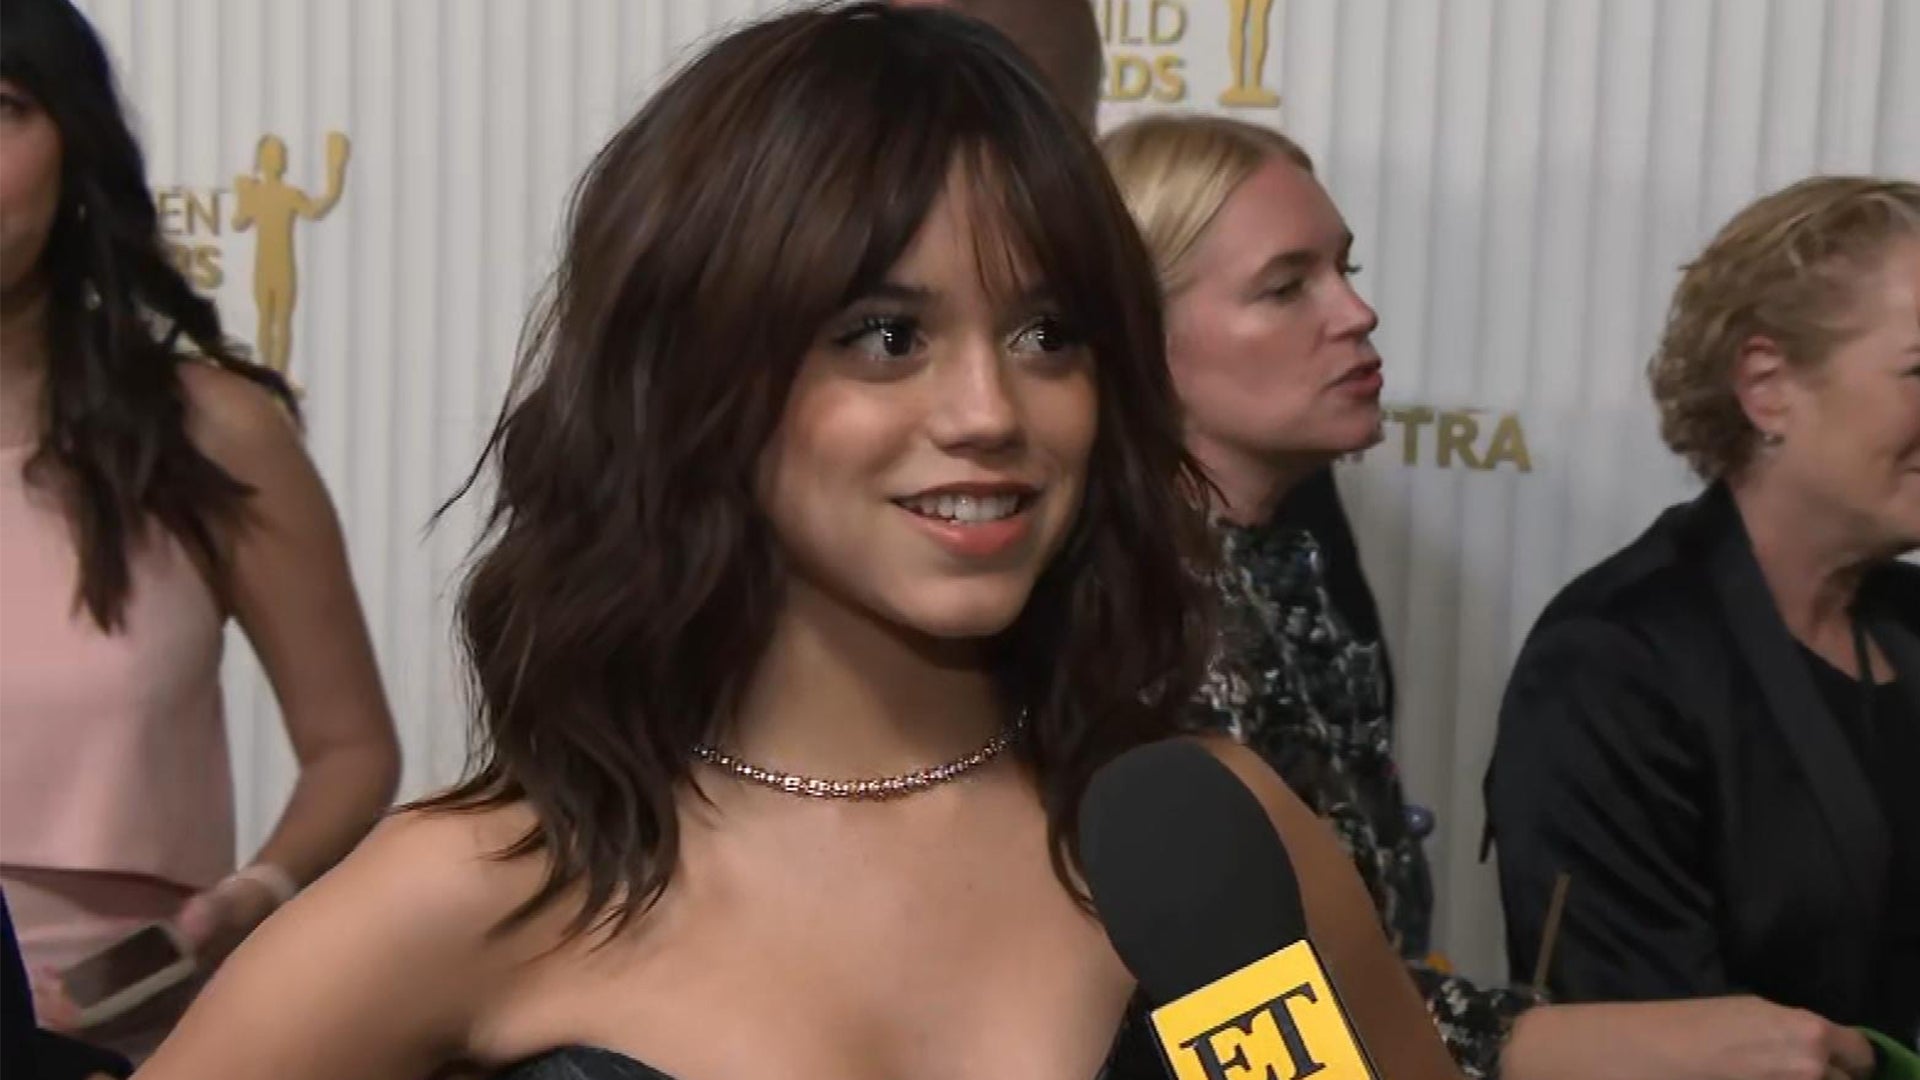 SAGs 2023: Viewers demand Jenna Ortega and Aubrey Plaza co-star as sisters  after they present award